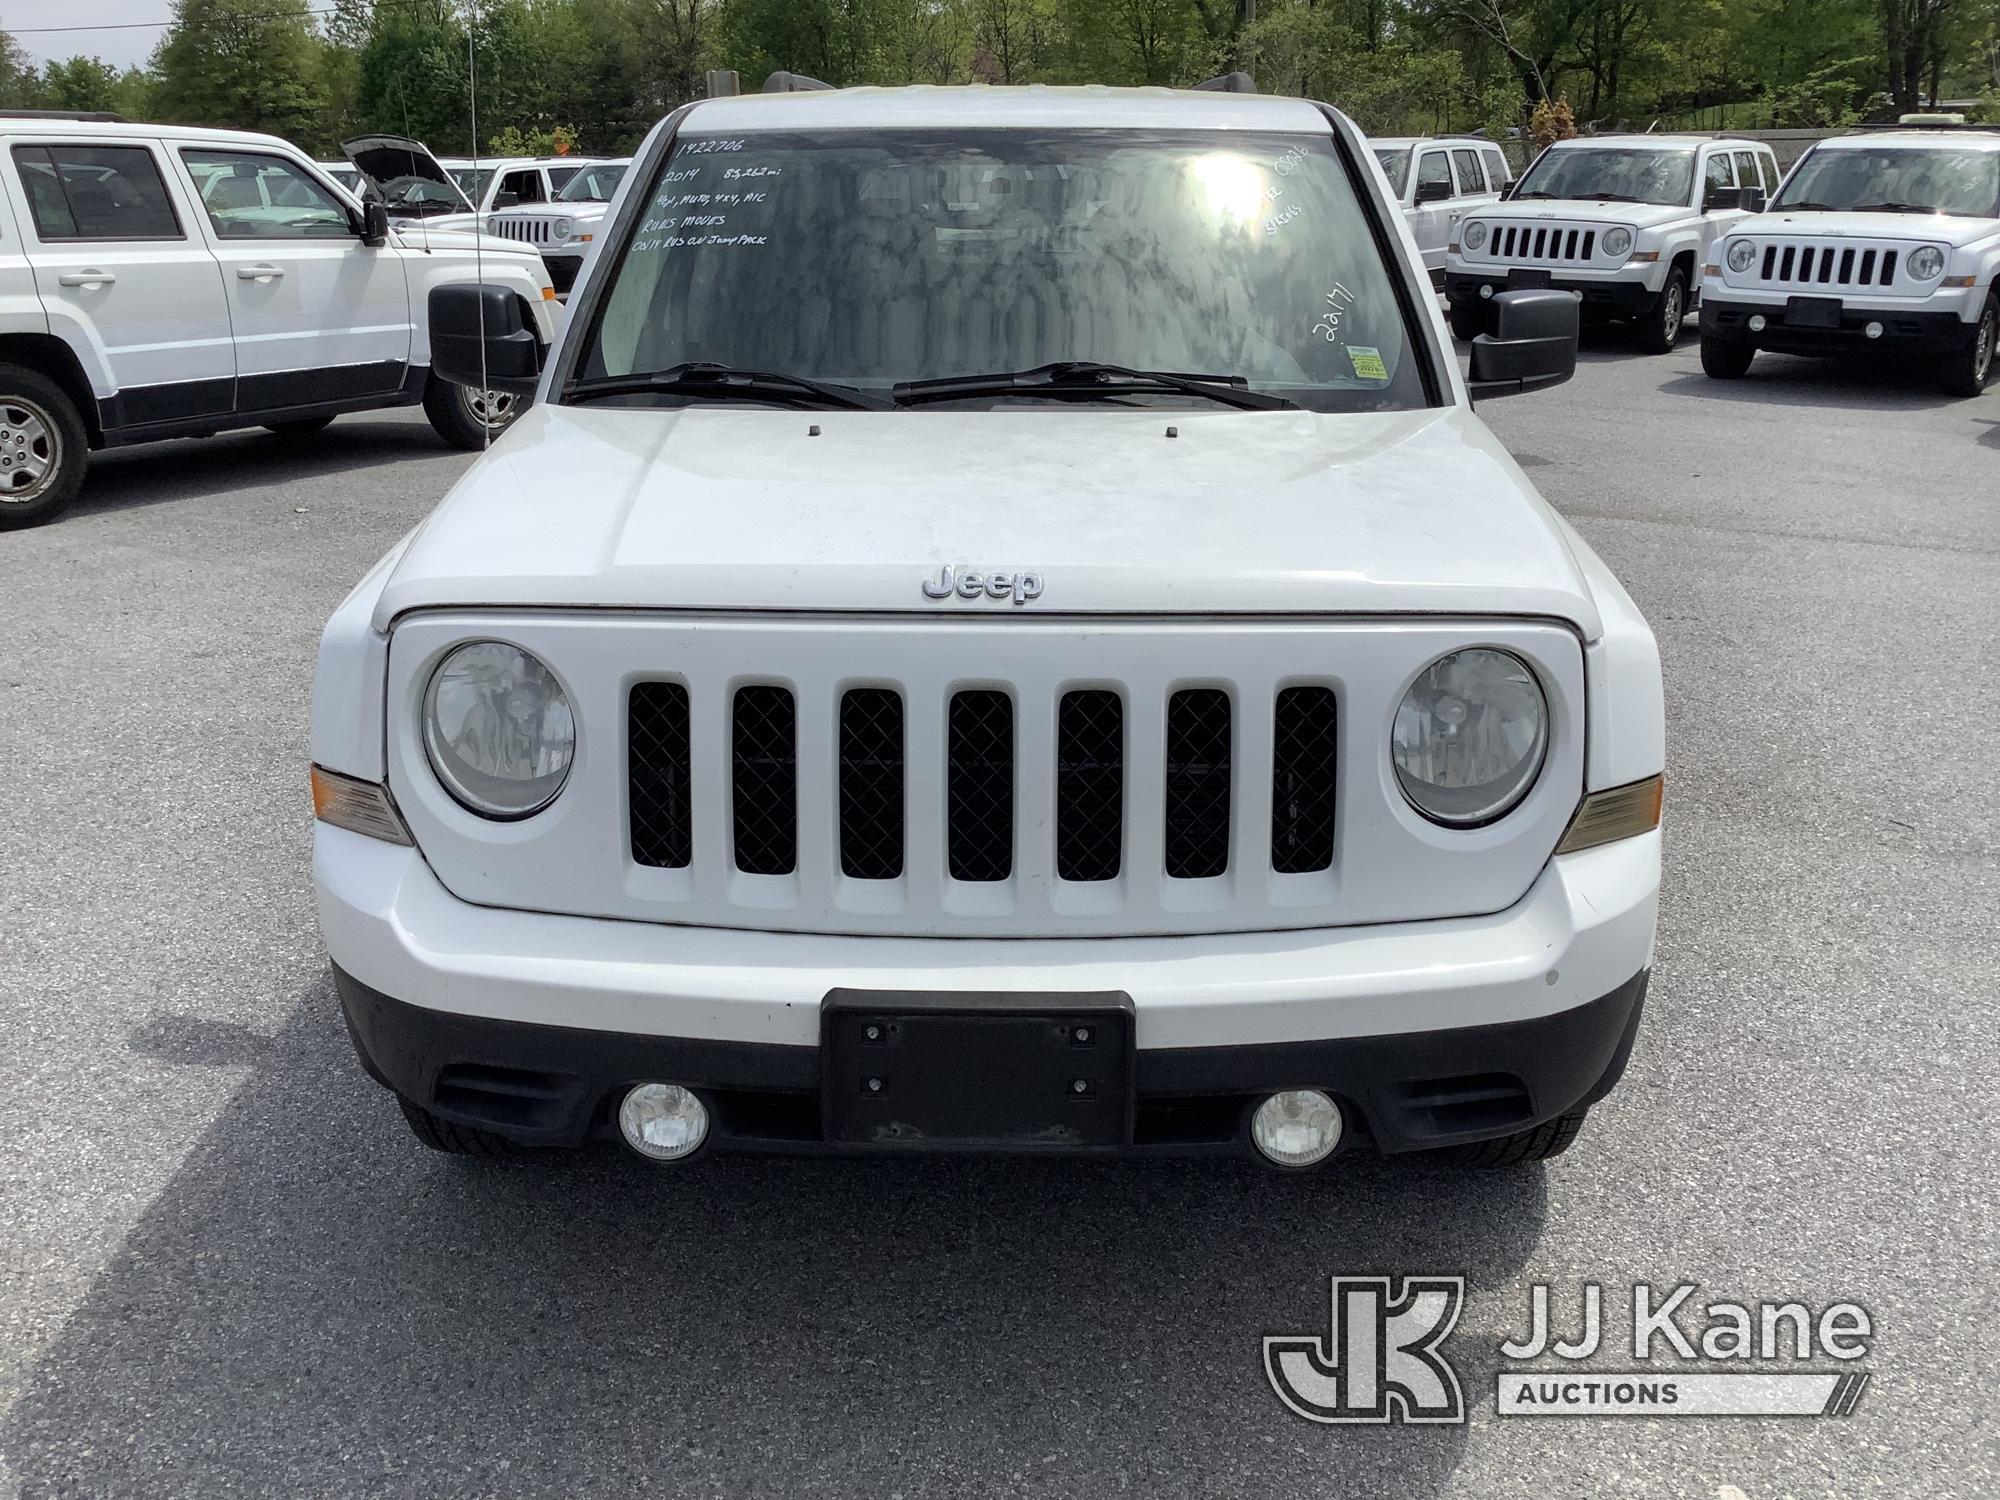 (Chester Springs, PA) 2014 Jeep Patriot 4x4 4-Door Sport Utility Vehicle Runes & Moves) (Only Runs O